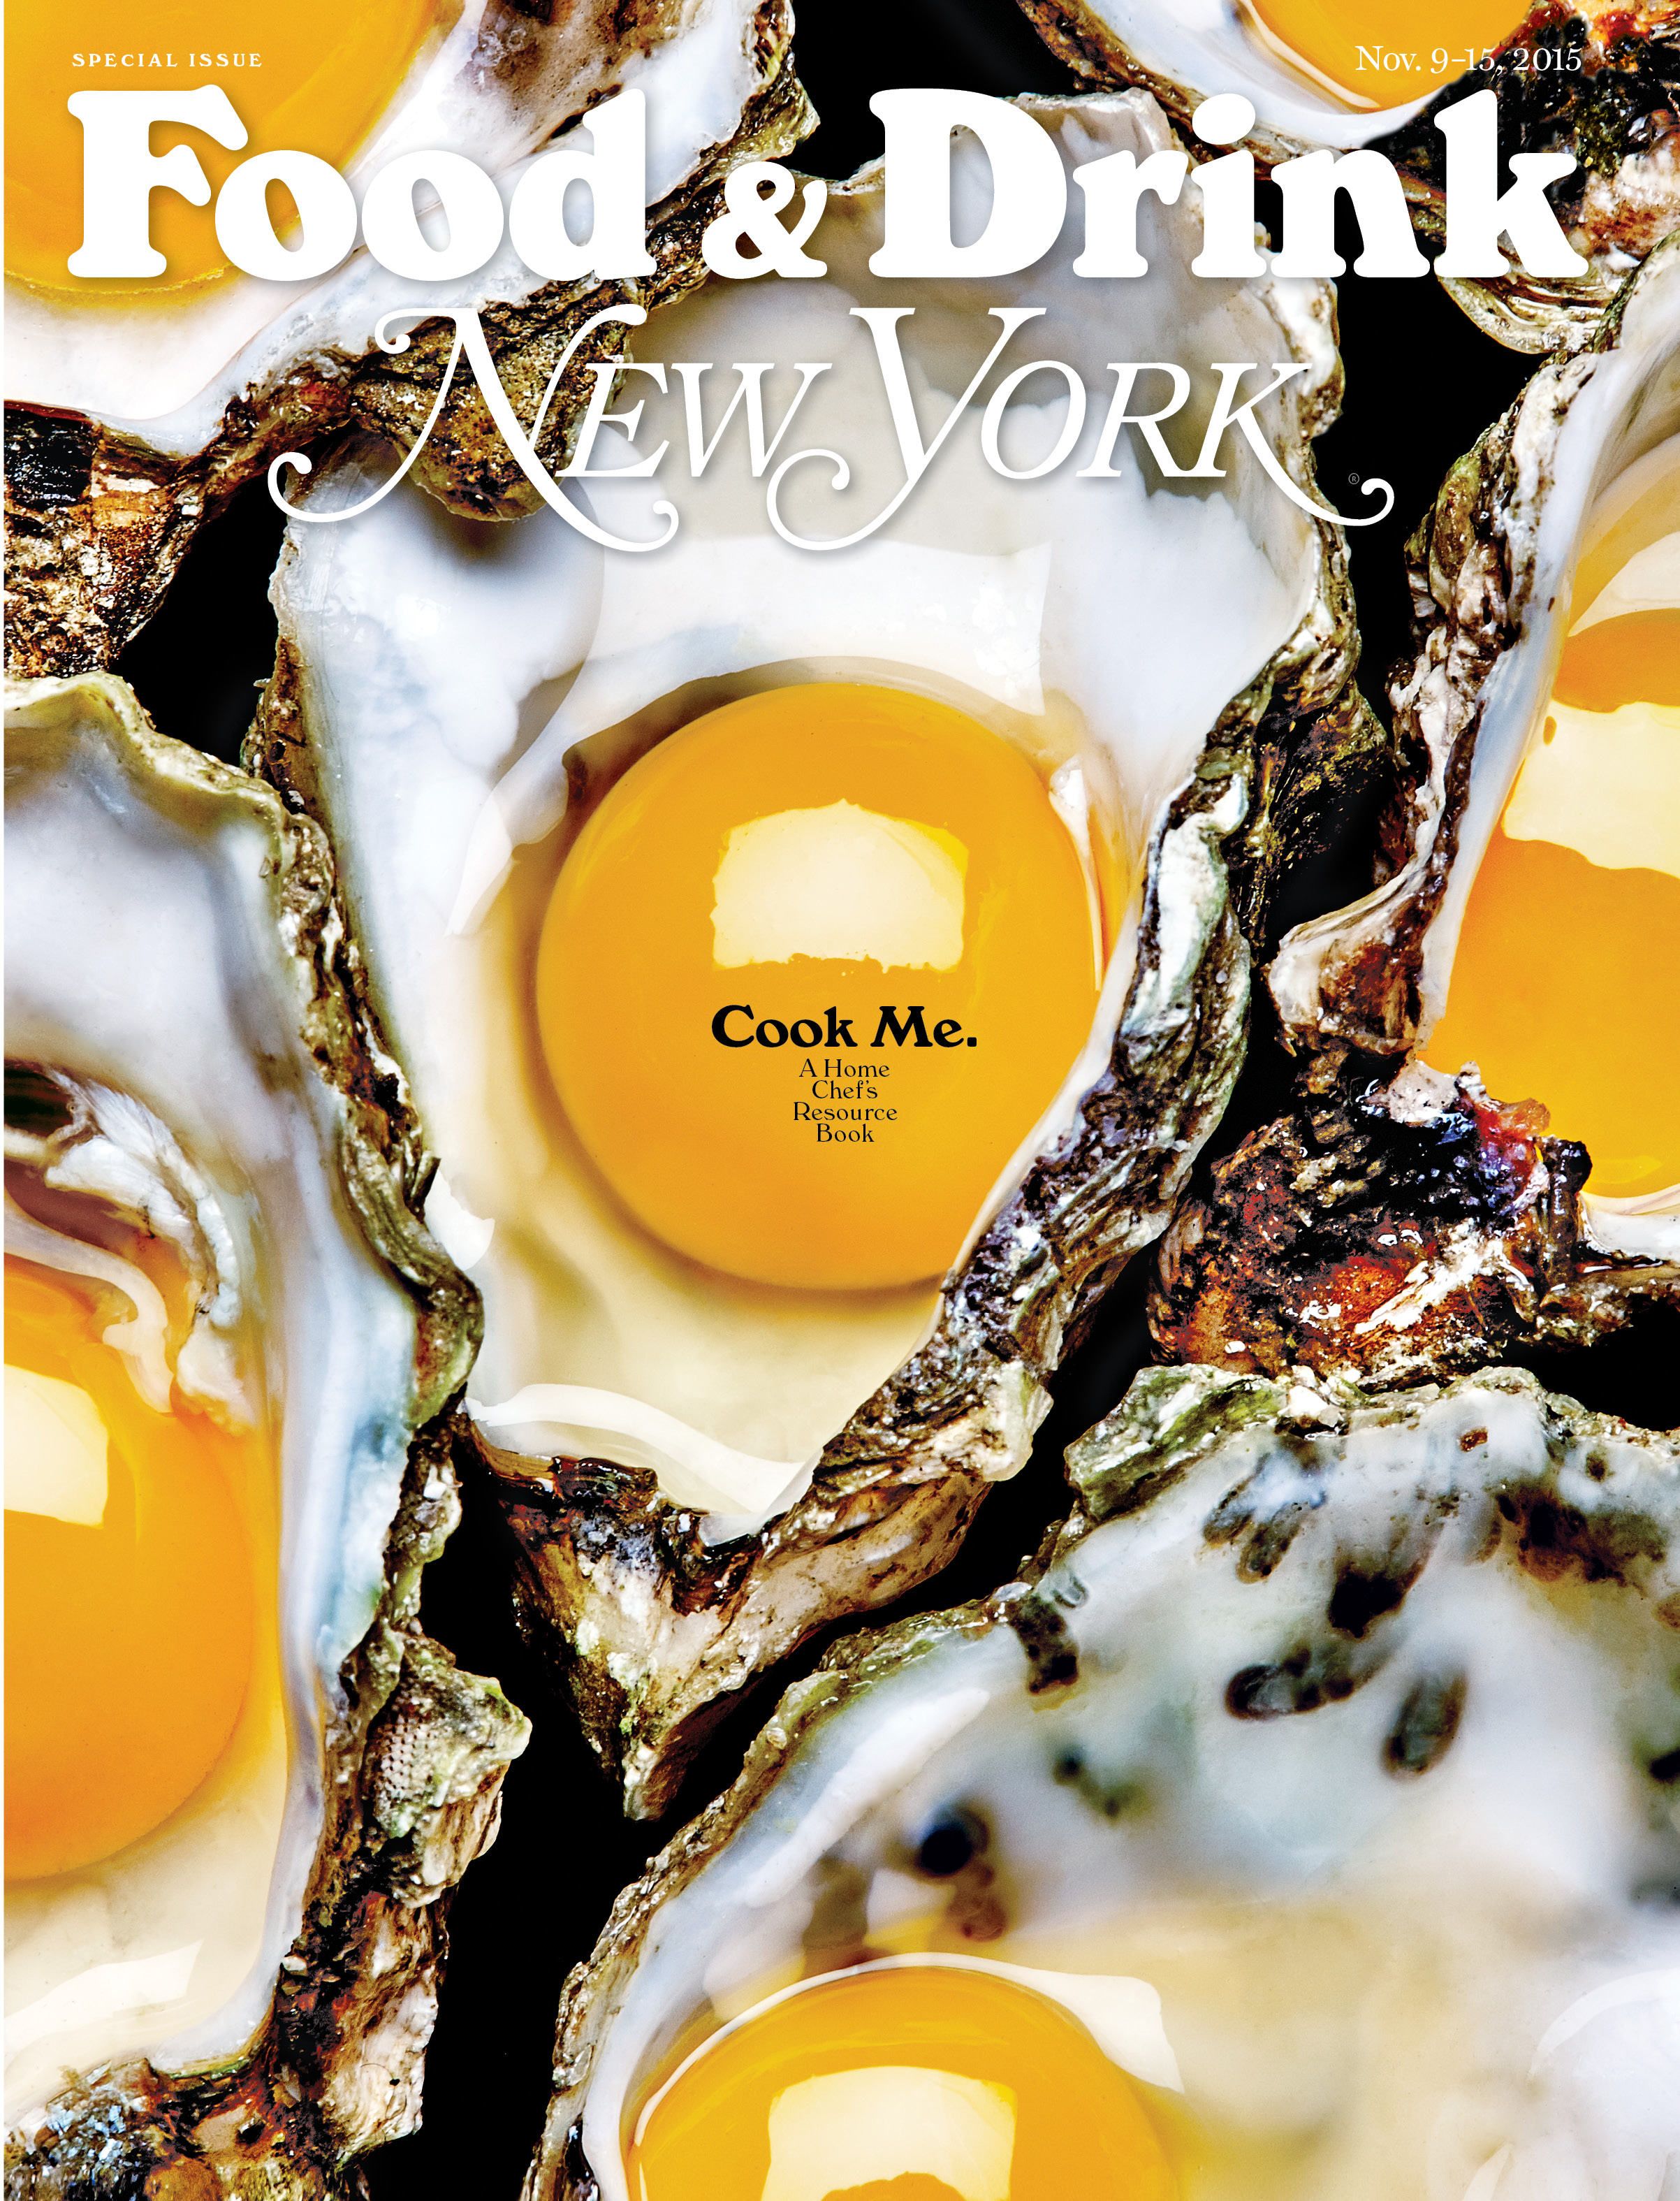 New York-"Cook Me. A Home Chef's Resource Book" November 9–15